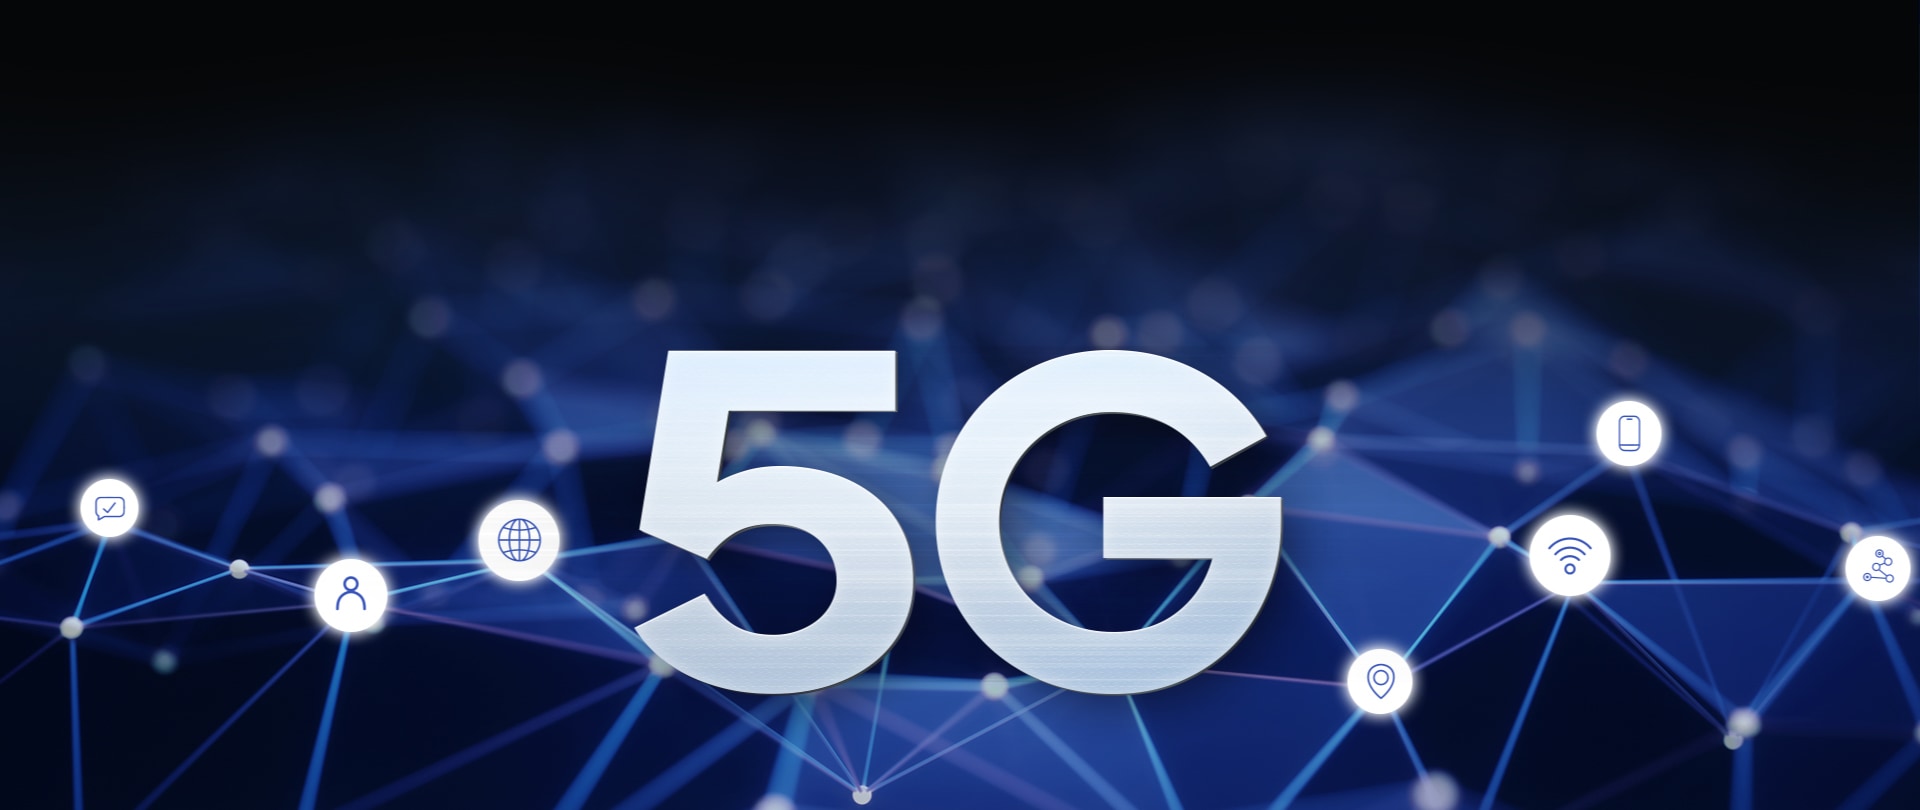 Equipped 5G modem supporting sub-6GHz and mmWave, the Exynos 1480 provides faster speed and broader connectivity.